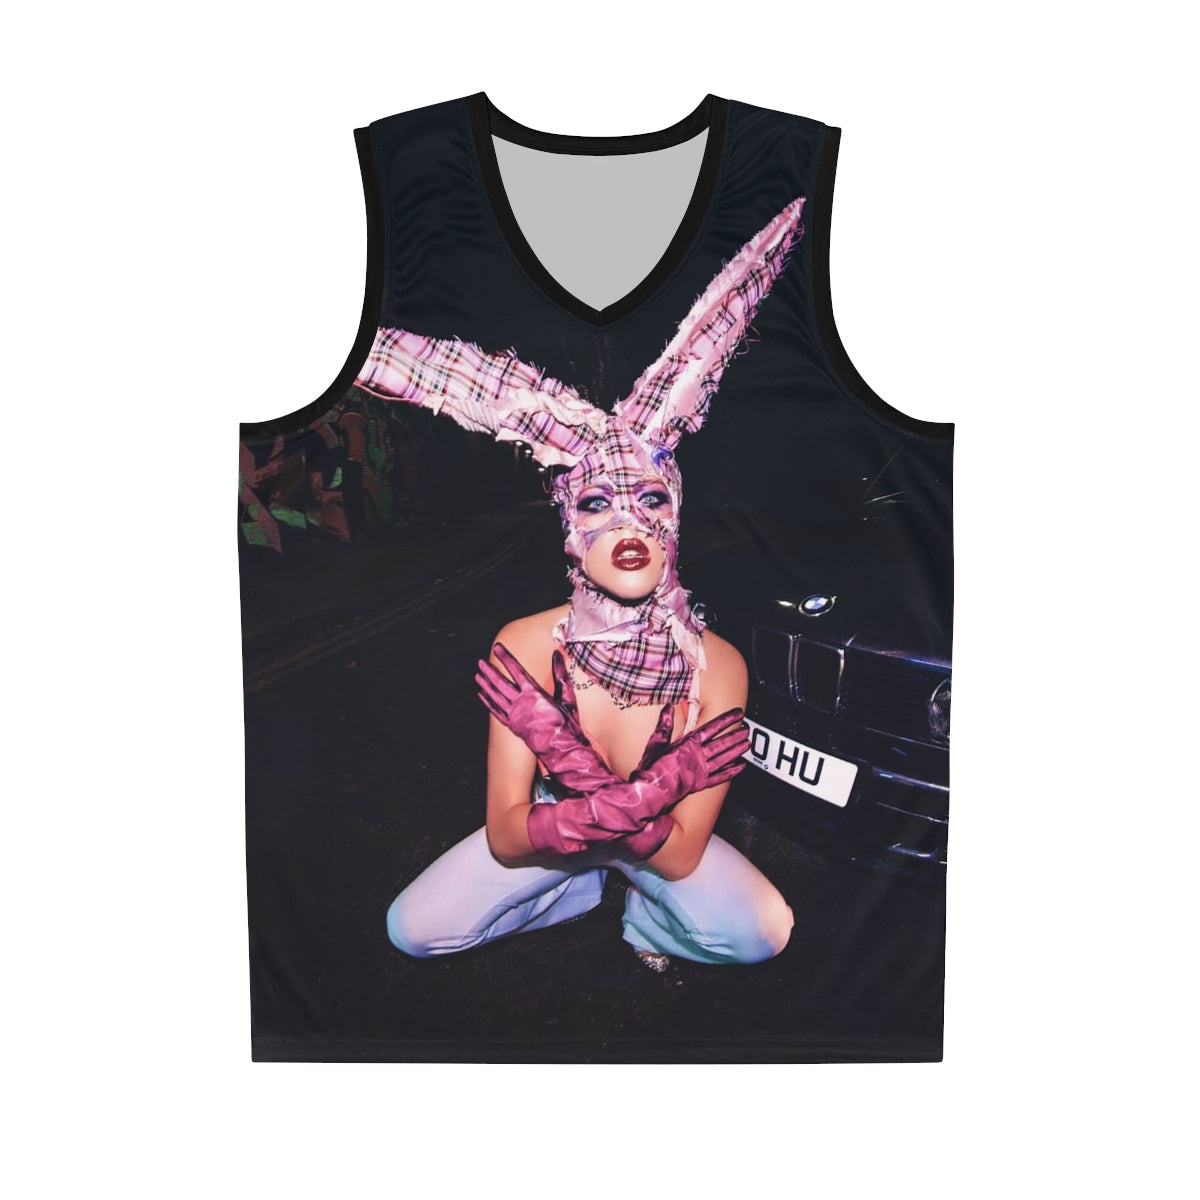 'YOU CAN'T TRUST NO BUNNY' JERSEY